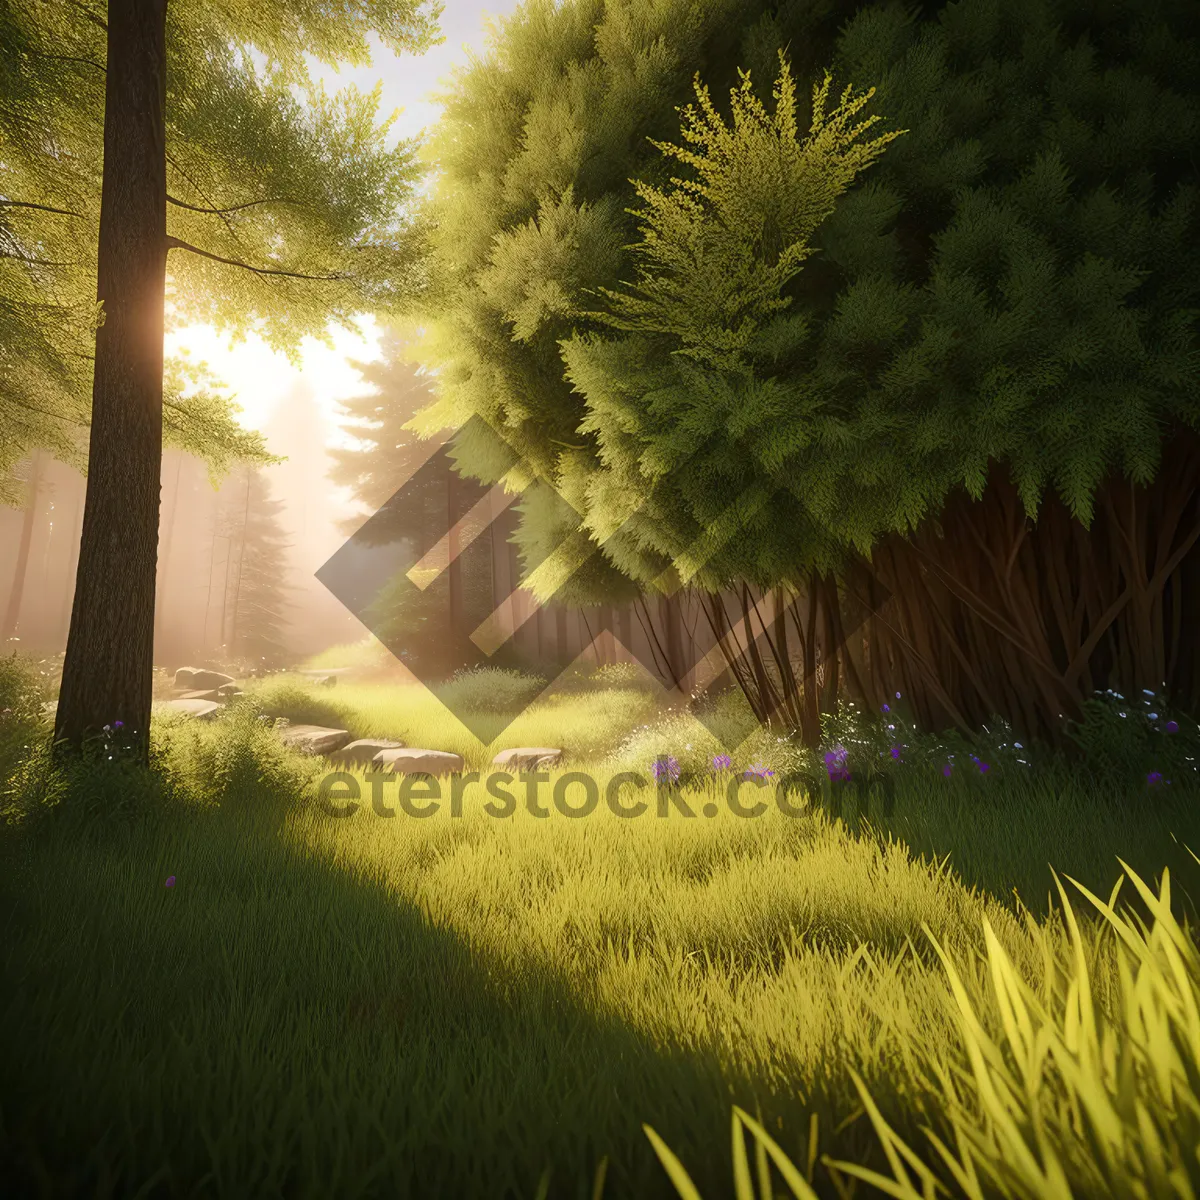 Picture of Vibrant rural forest under sunny skies